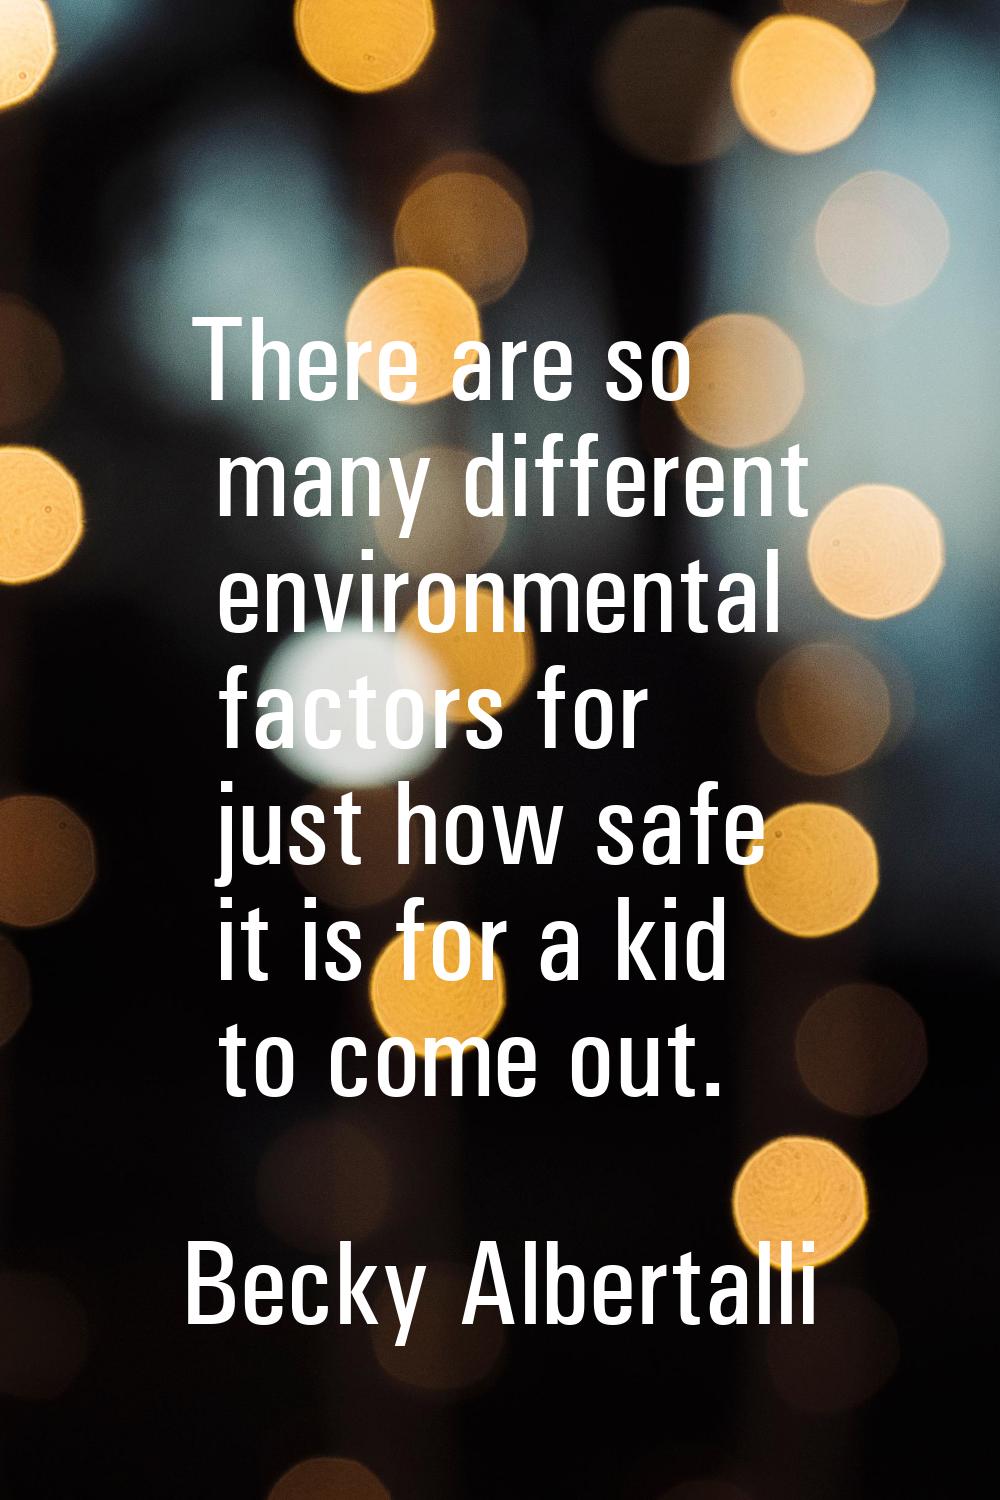 There are so many different environmental factors for just how safe it is for a kid to come out.